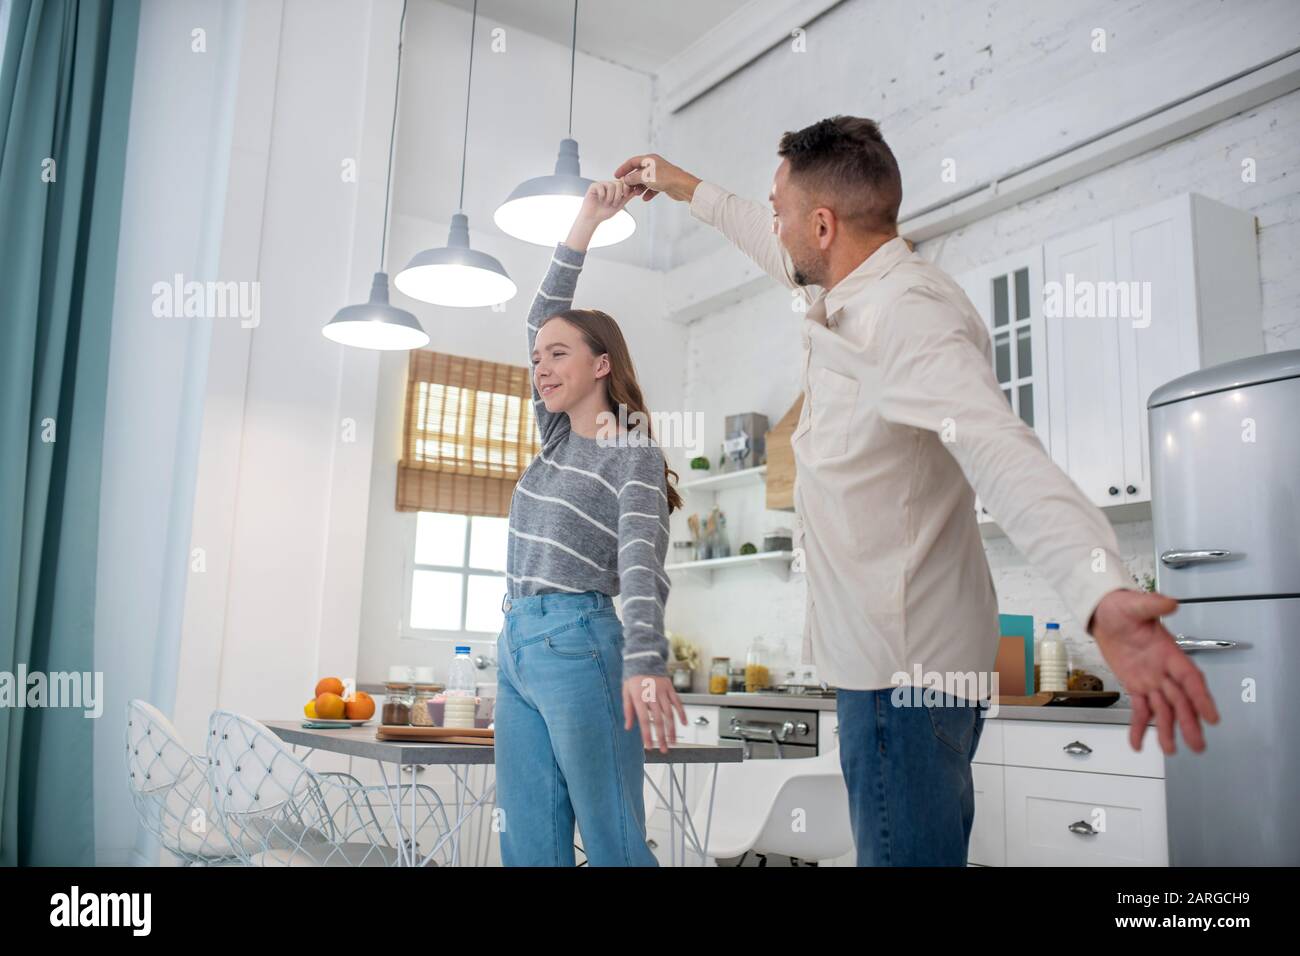 Daughter teenager dancing with dad in the kitchen. Stock Photo